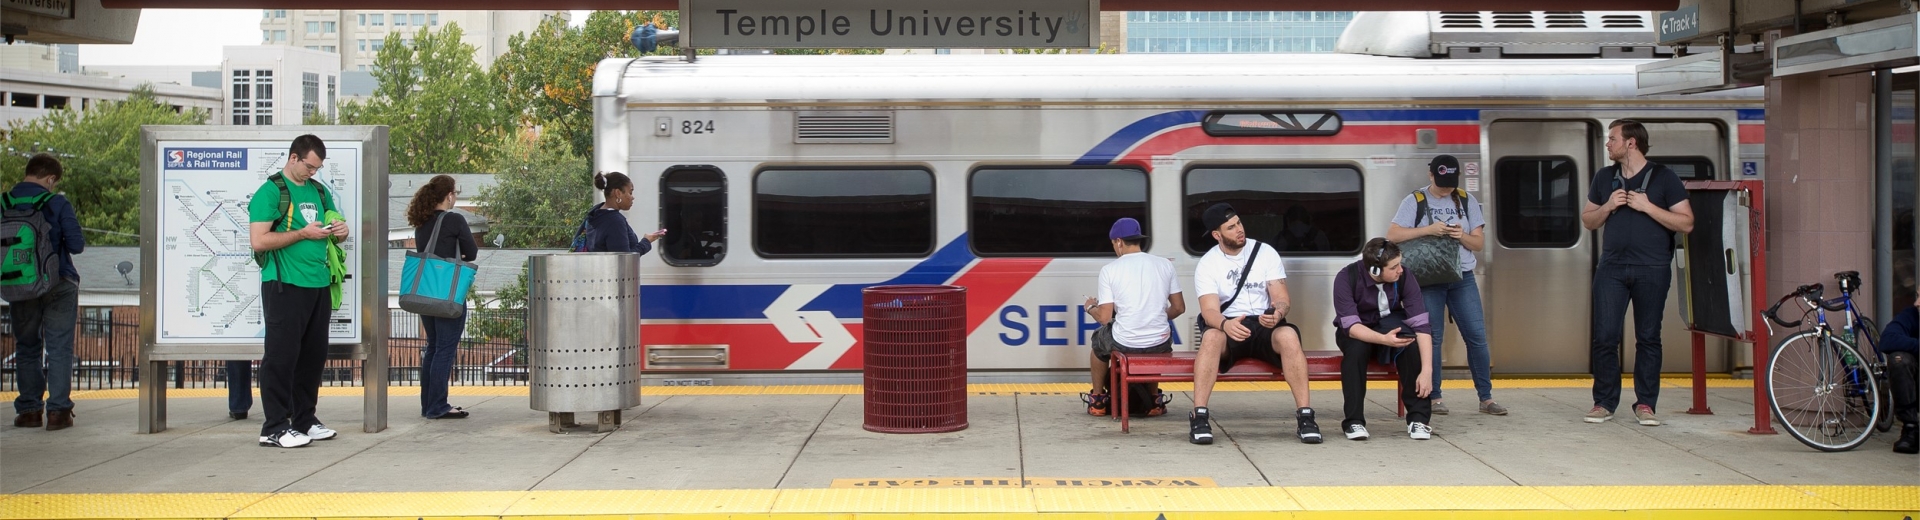 Temple University students standing on the platform at the SEPTA train station.